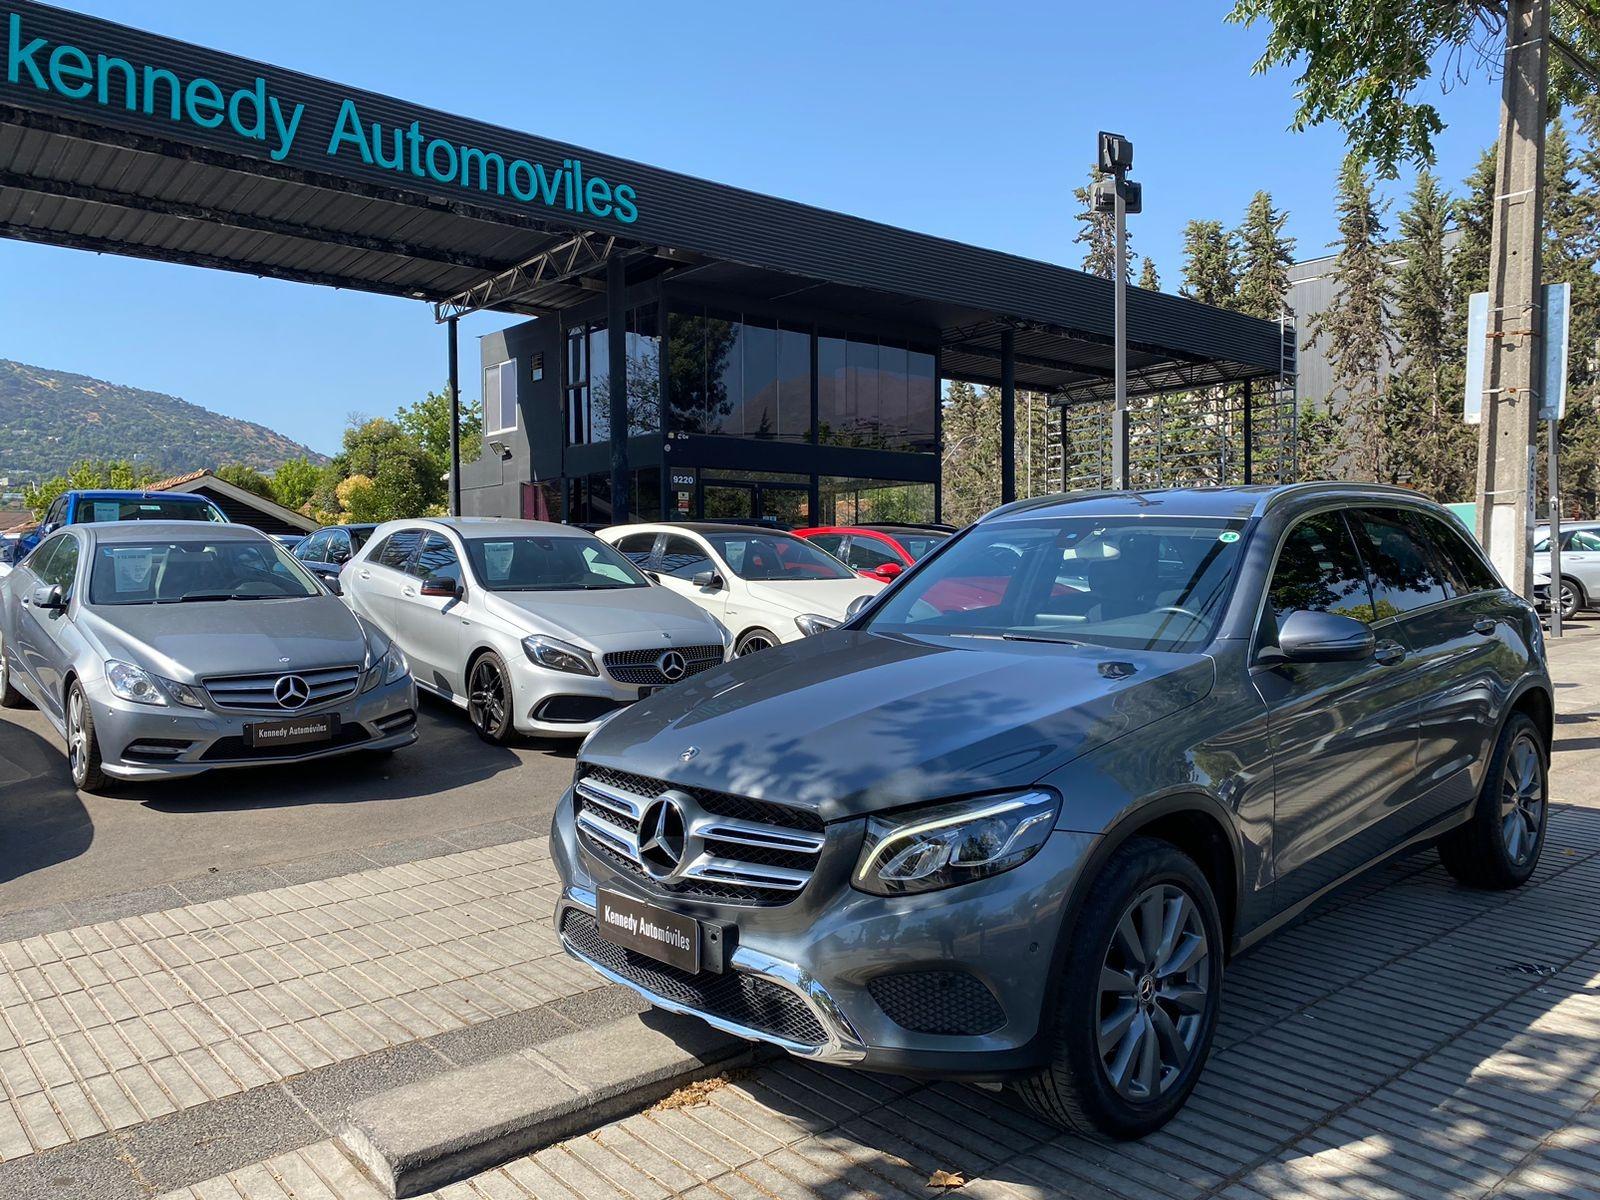 MERCEDES-BENZ GLC 220 2.1 GLC 220D Auto 4Matic 2018 Impecable - KENNEDY AUTOMOVILES